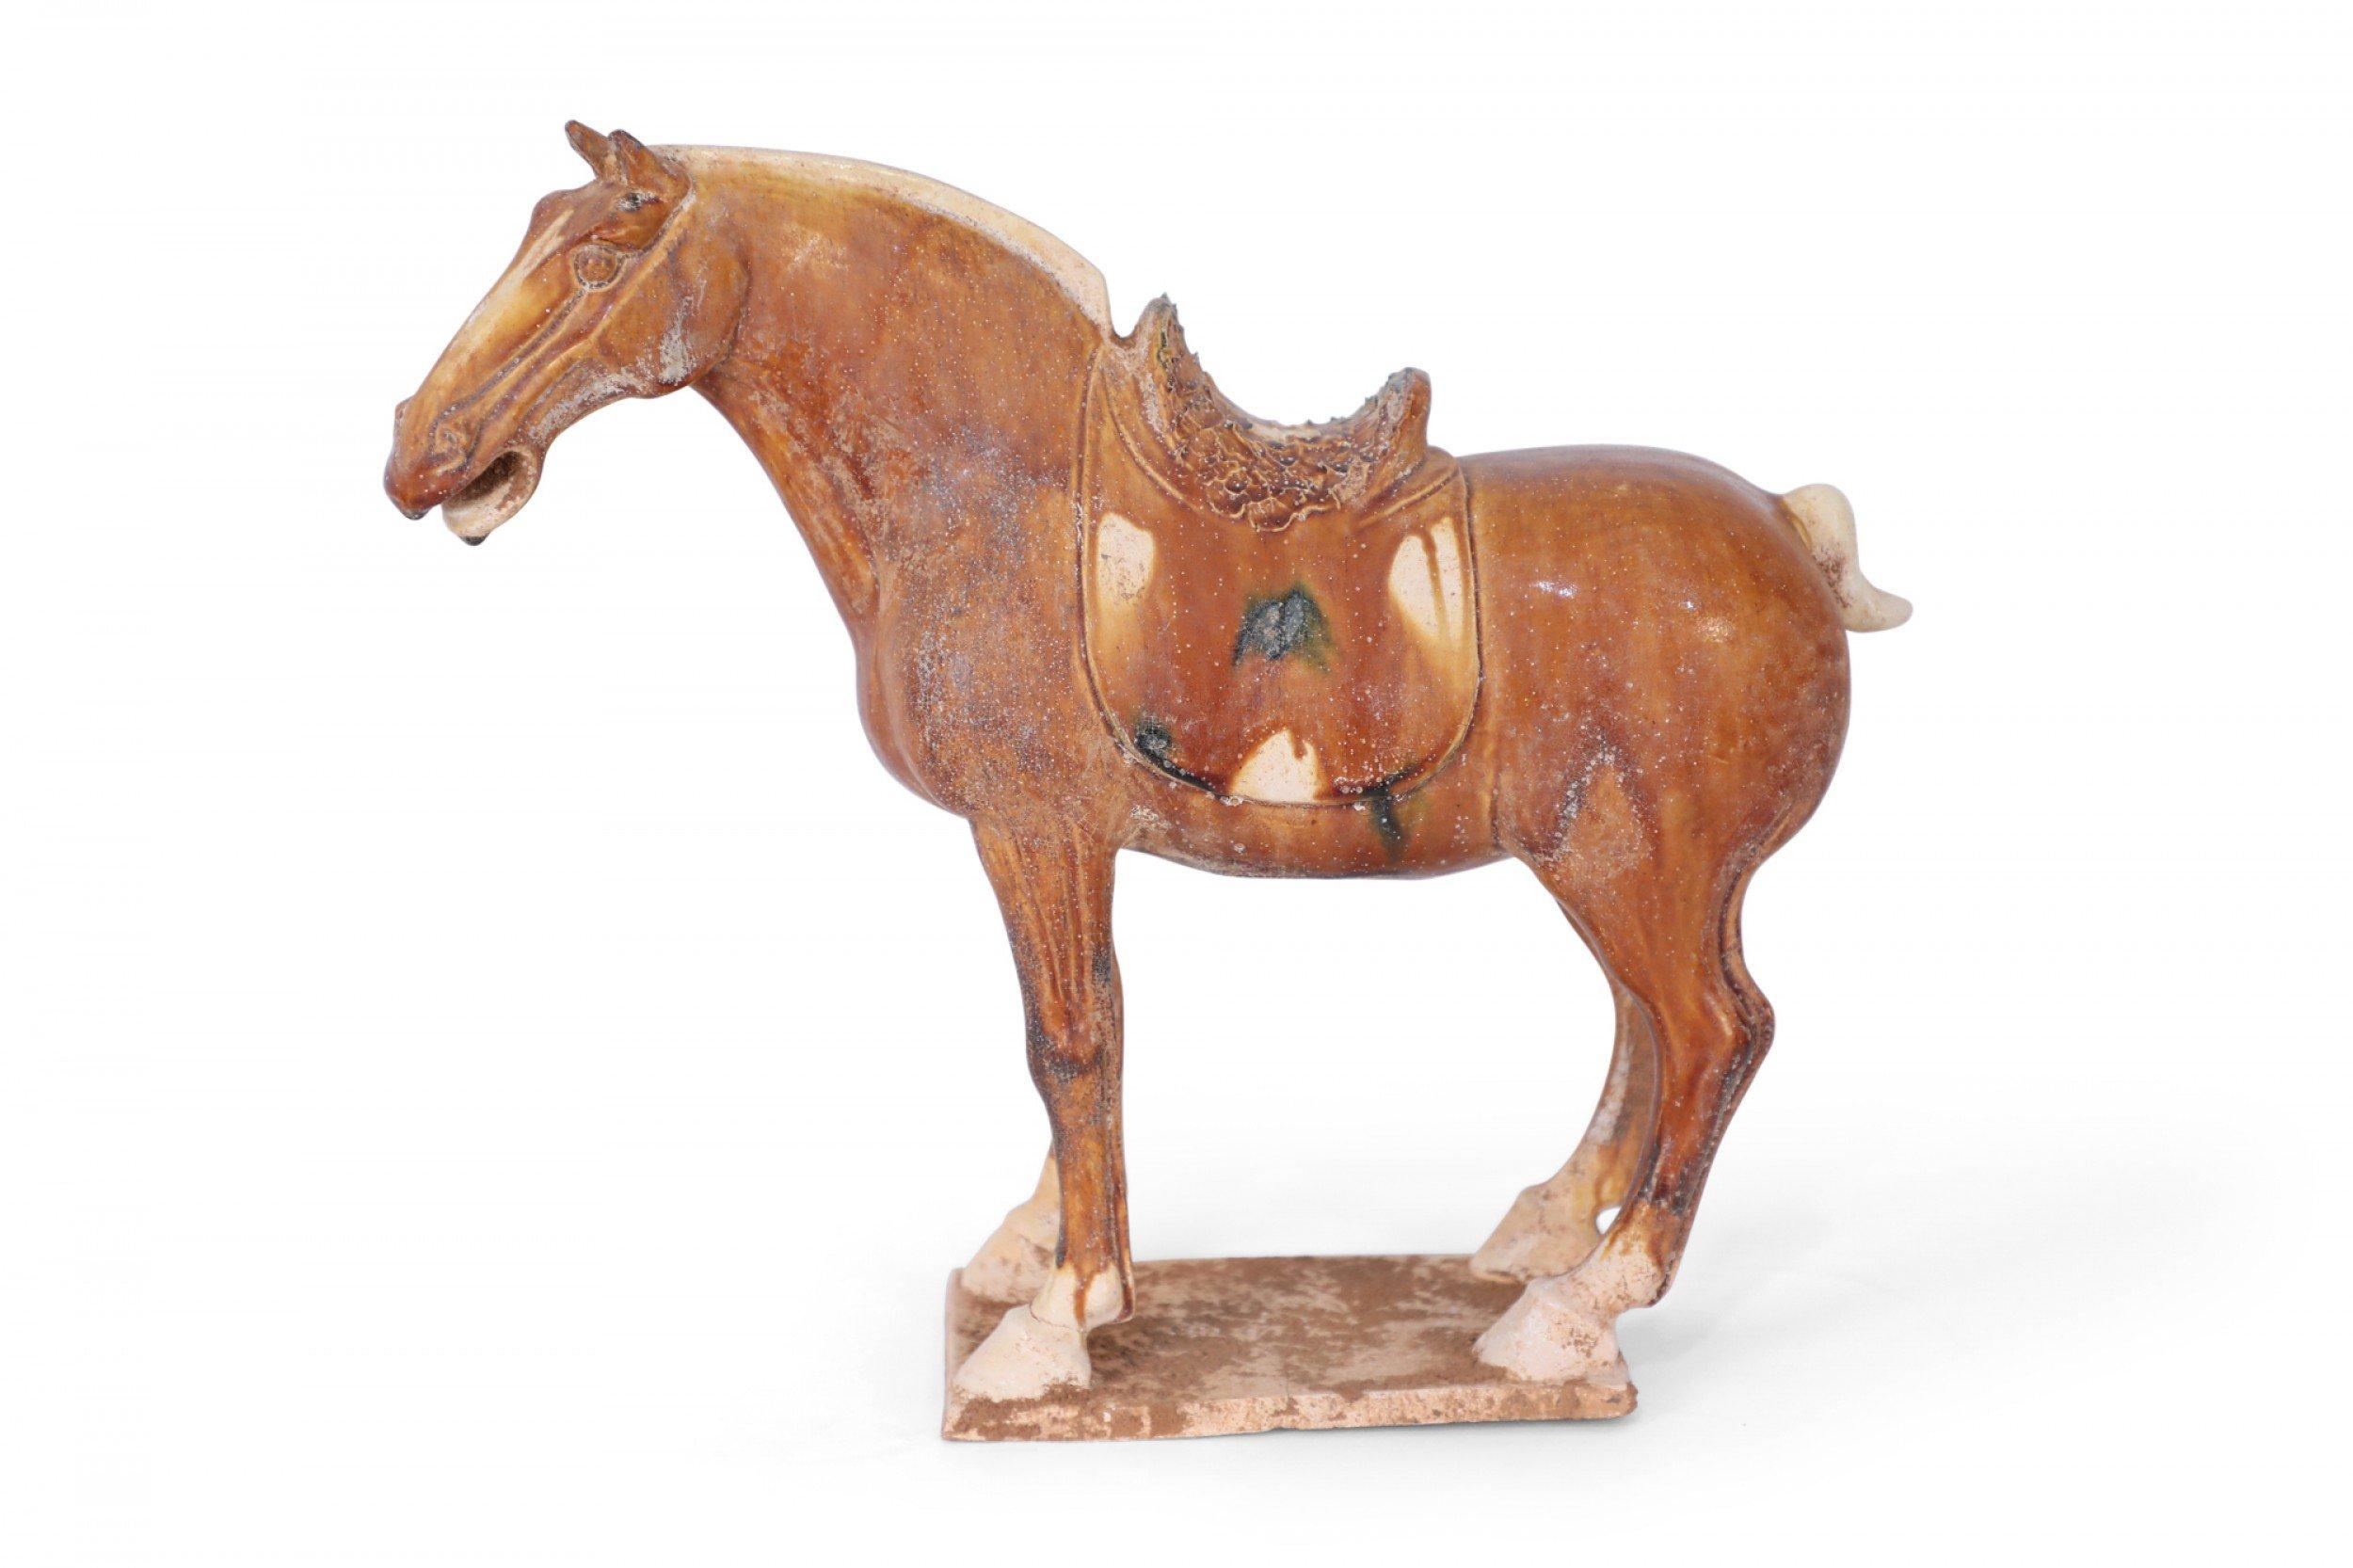 Antique Chinese Tang Dynasty-style terra cotta figure of a horse commonly used as a tomb figure for wealthy burials in the 7-8th centuries, and crafted with its traditional tri-color glaze, or Sancai, utilizing brown, green and off-white.
 